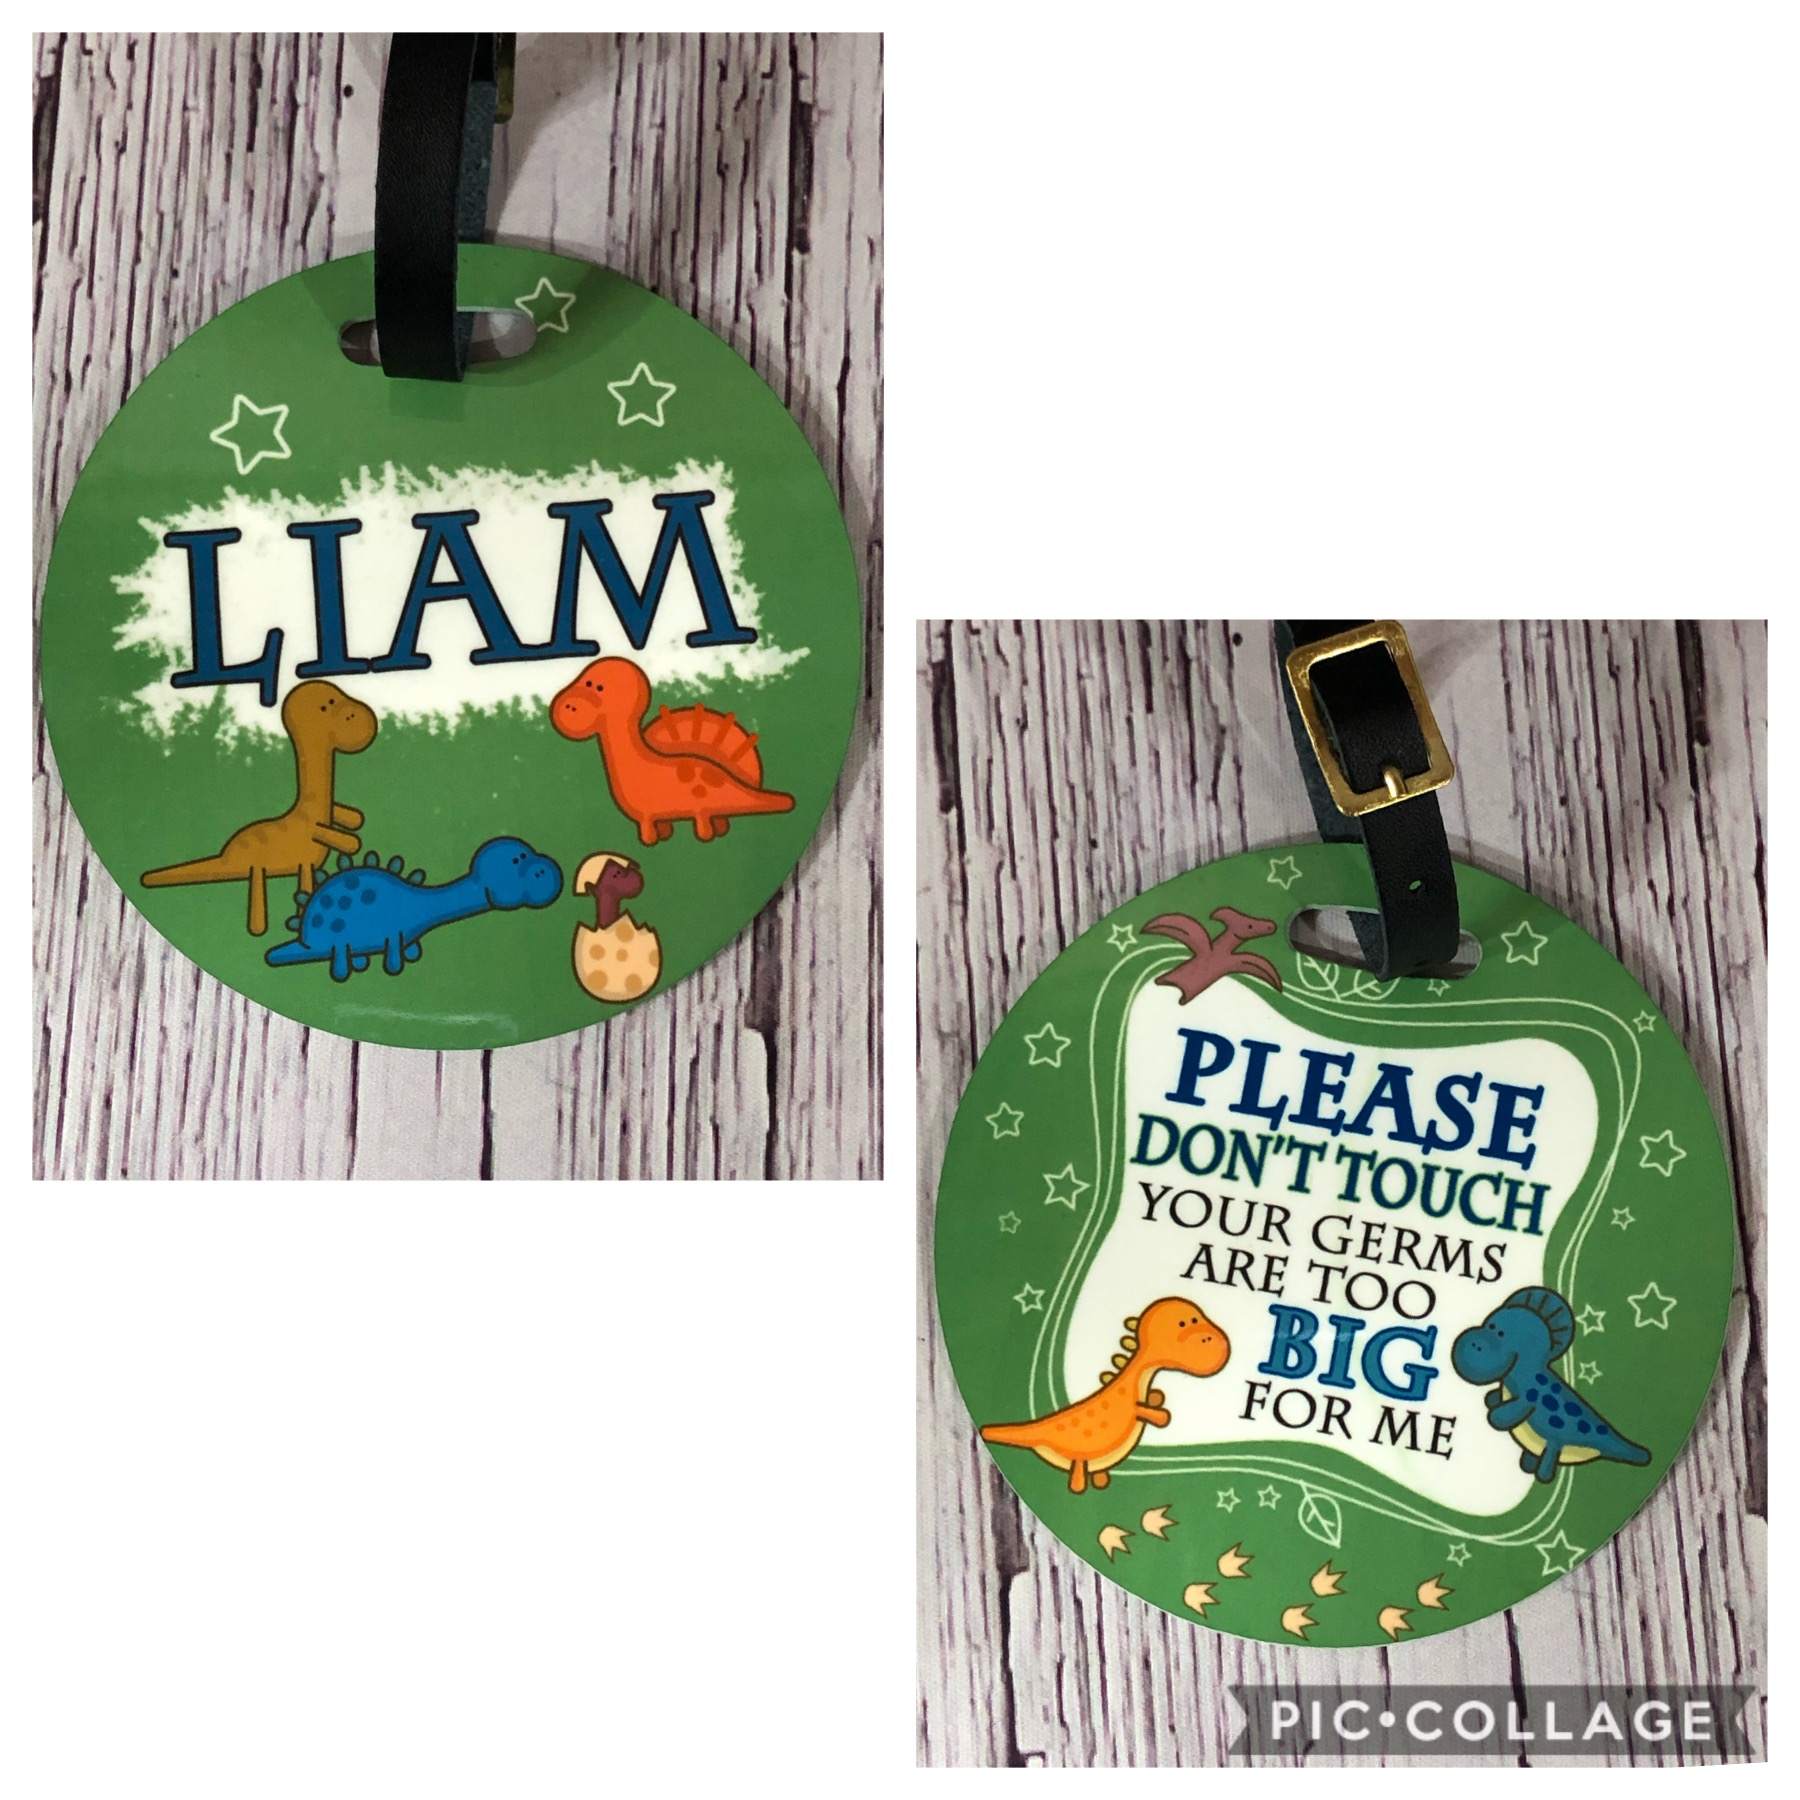 Perfect tag to hang from babyâ€™s car seat or stroller to help keep them safe